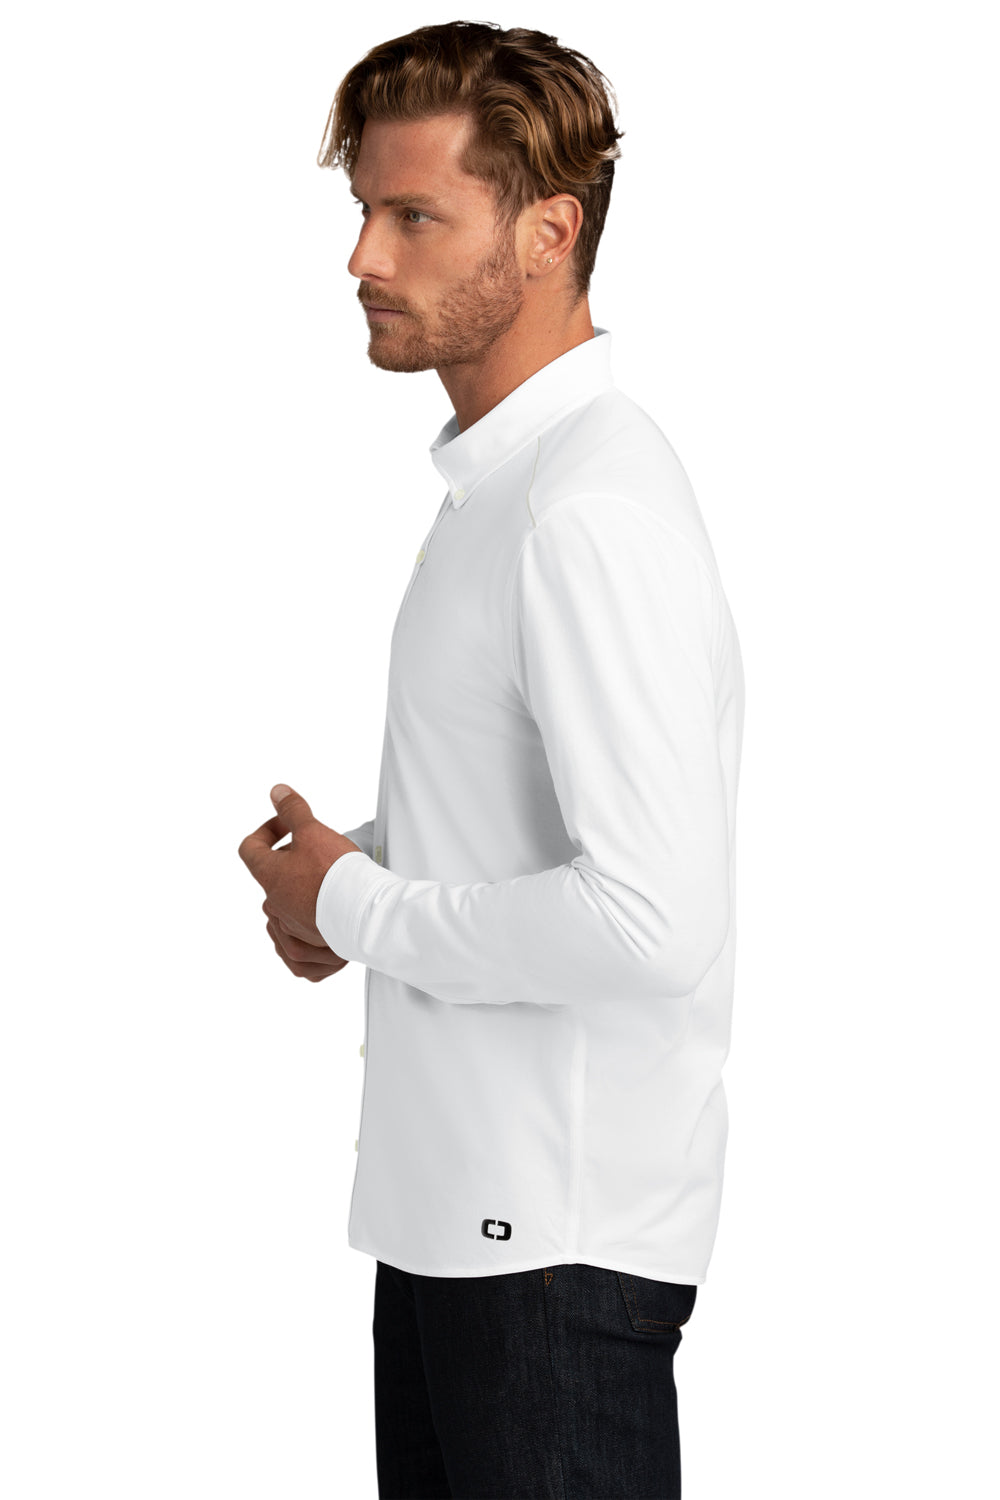 Ogio Mens Code Stretch Long Sleeve Button Down Shirt Bright White Side